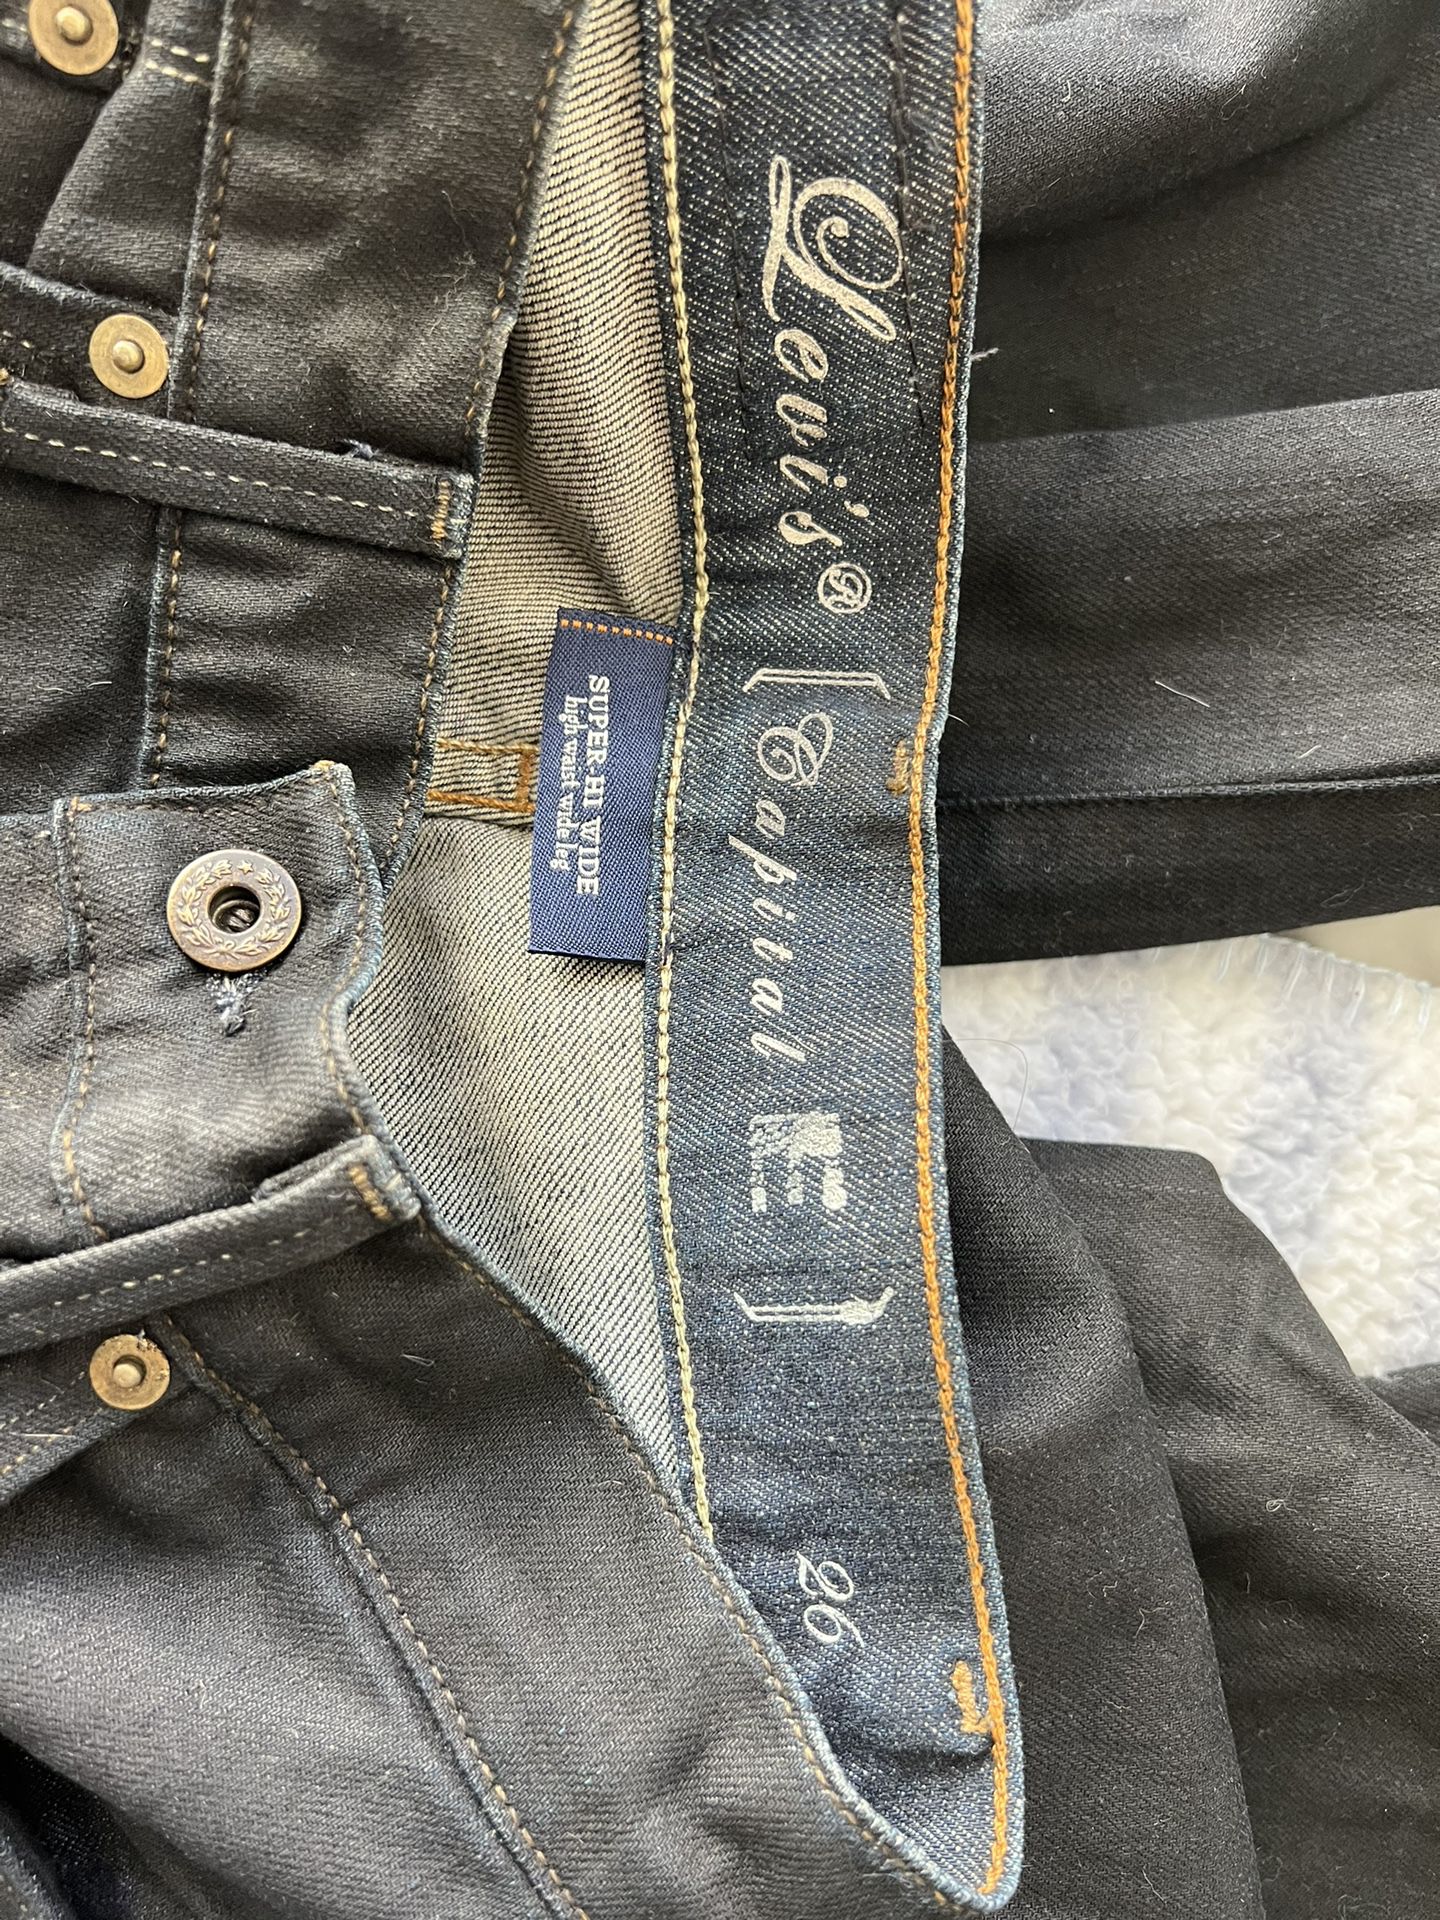 Levi's Capital High Waist Wide Leg Vintage Jeans (Size 26) for Sale in  Yorba Linda, CA - OfferUp